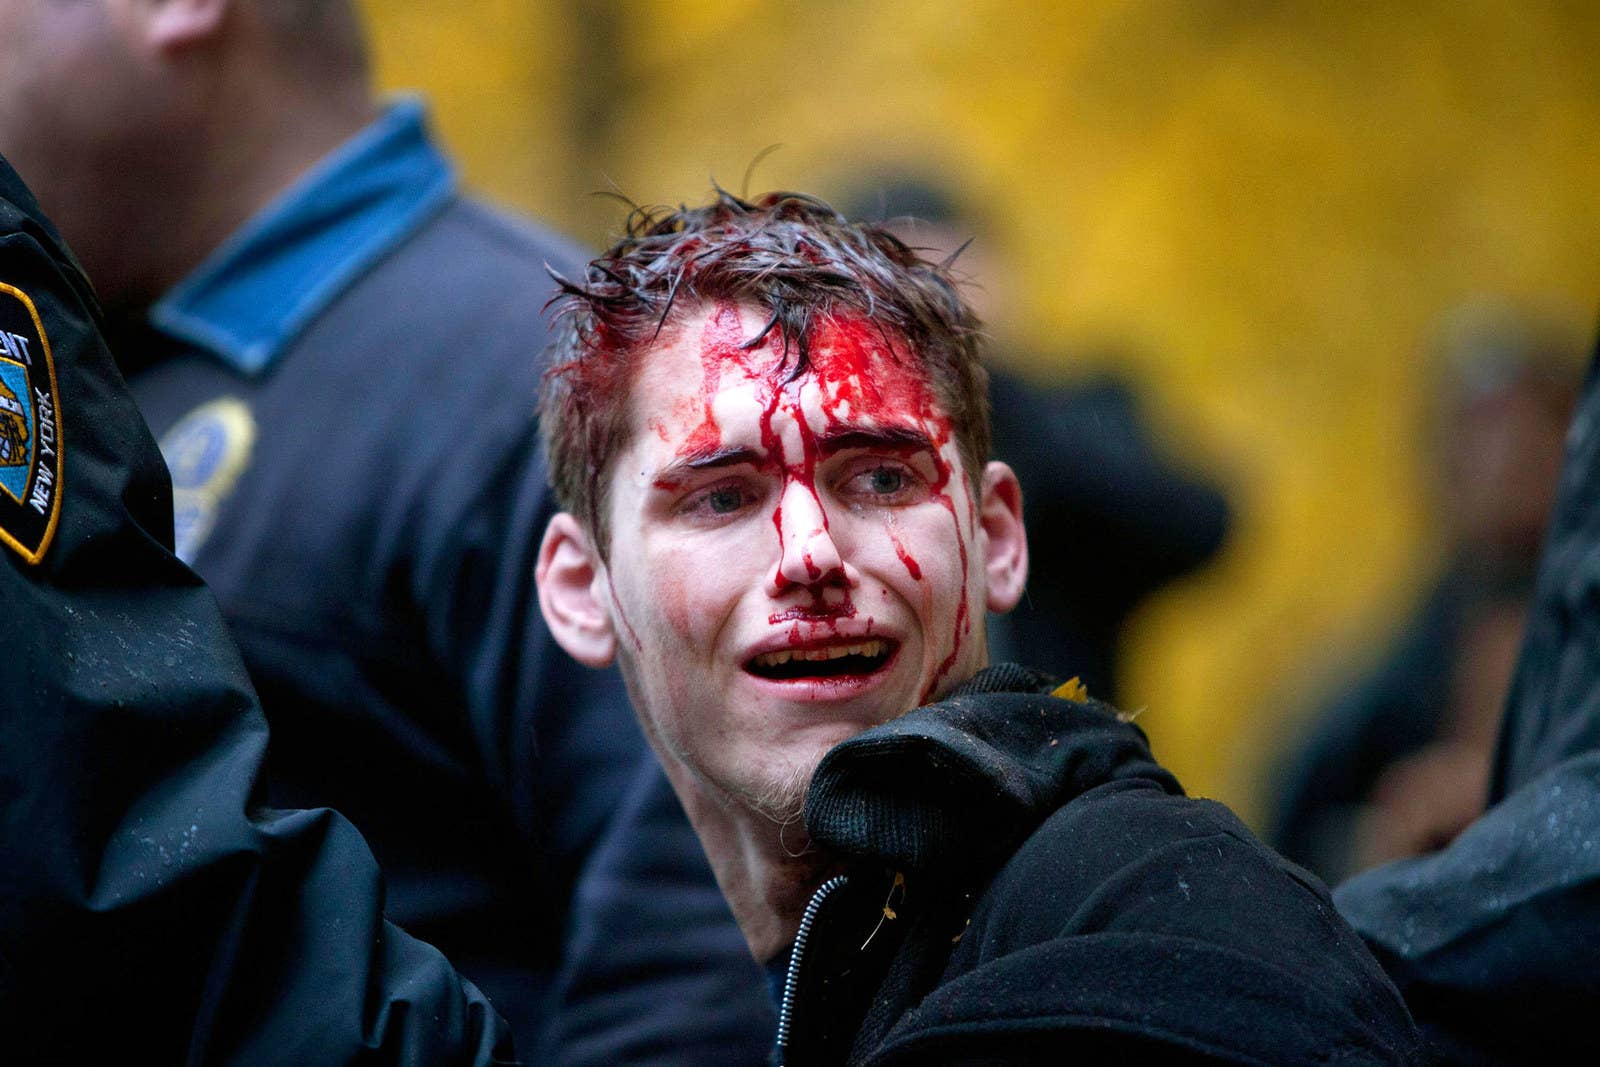 A man is seen with blood on his face after being apprehended by police in Zuccotti Park on Nov. 17, 2011.